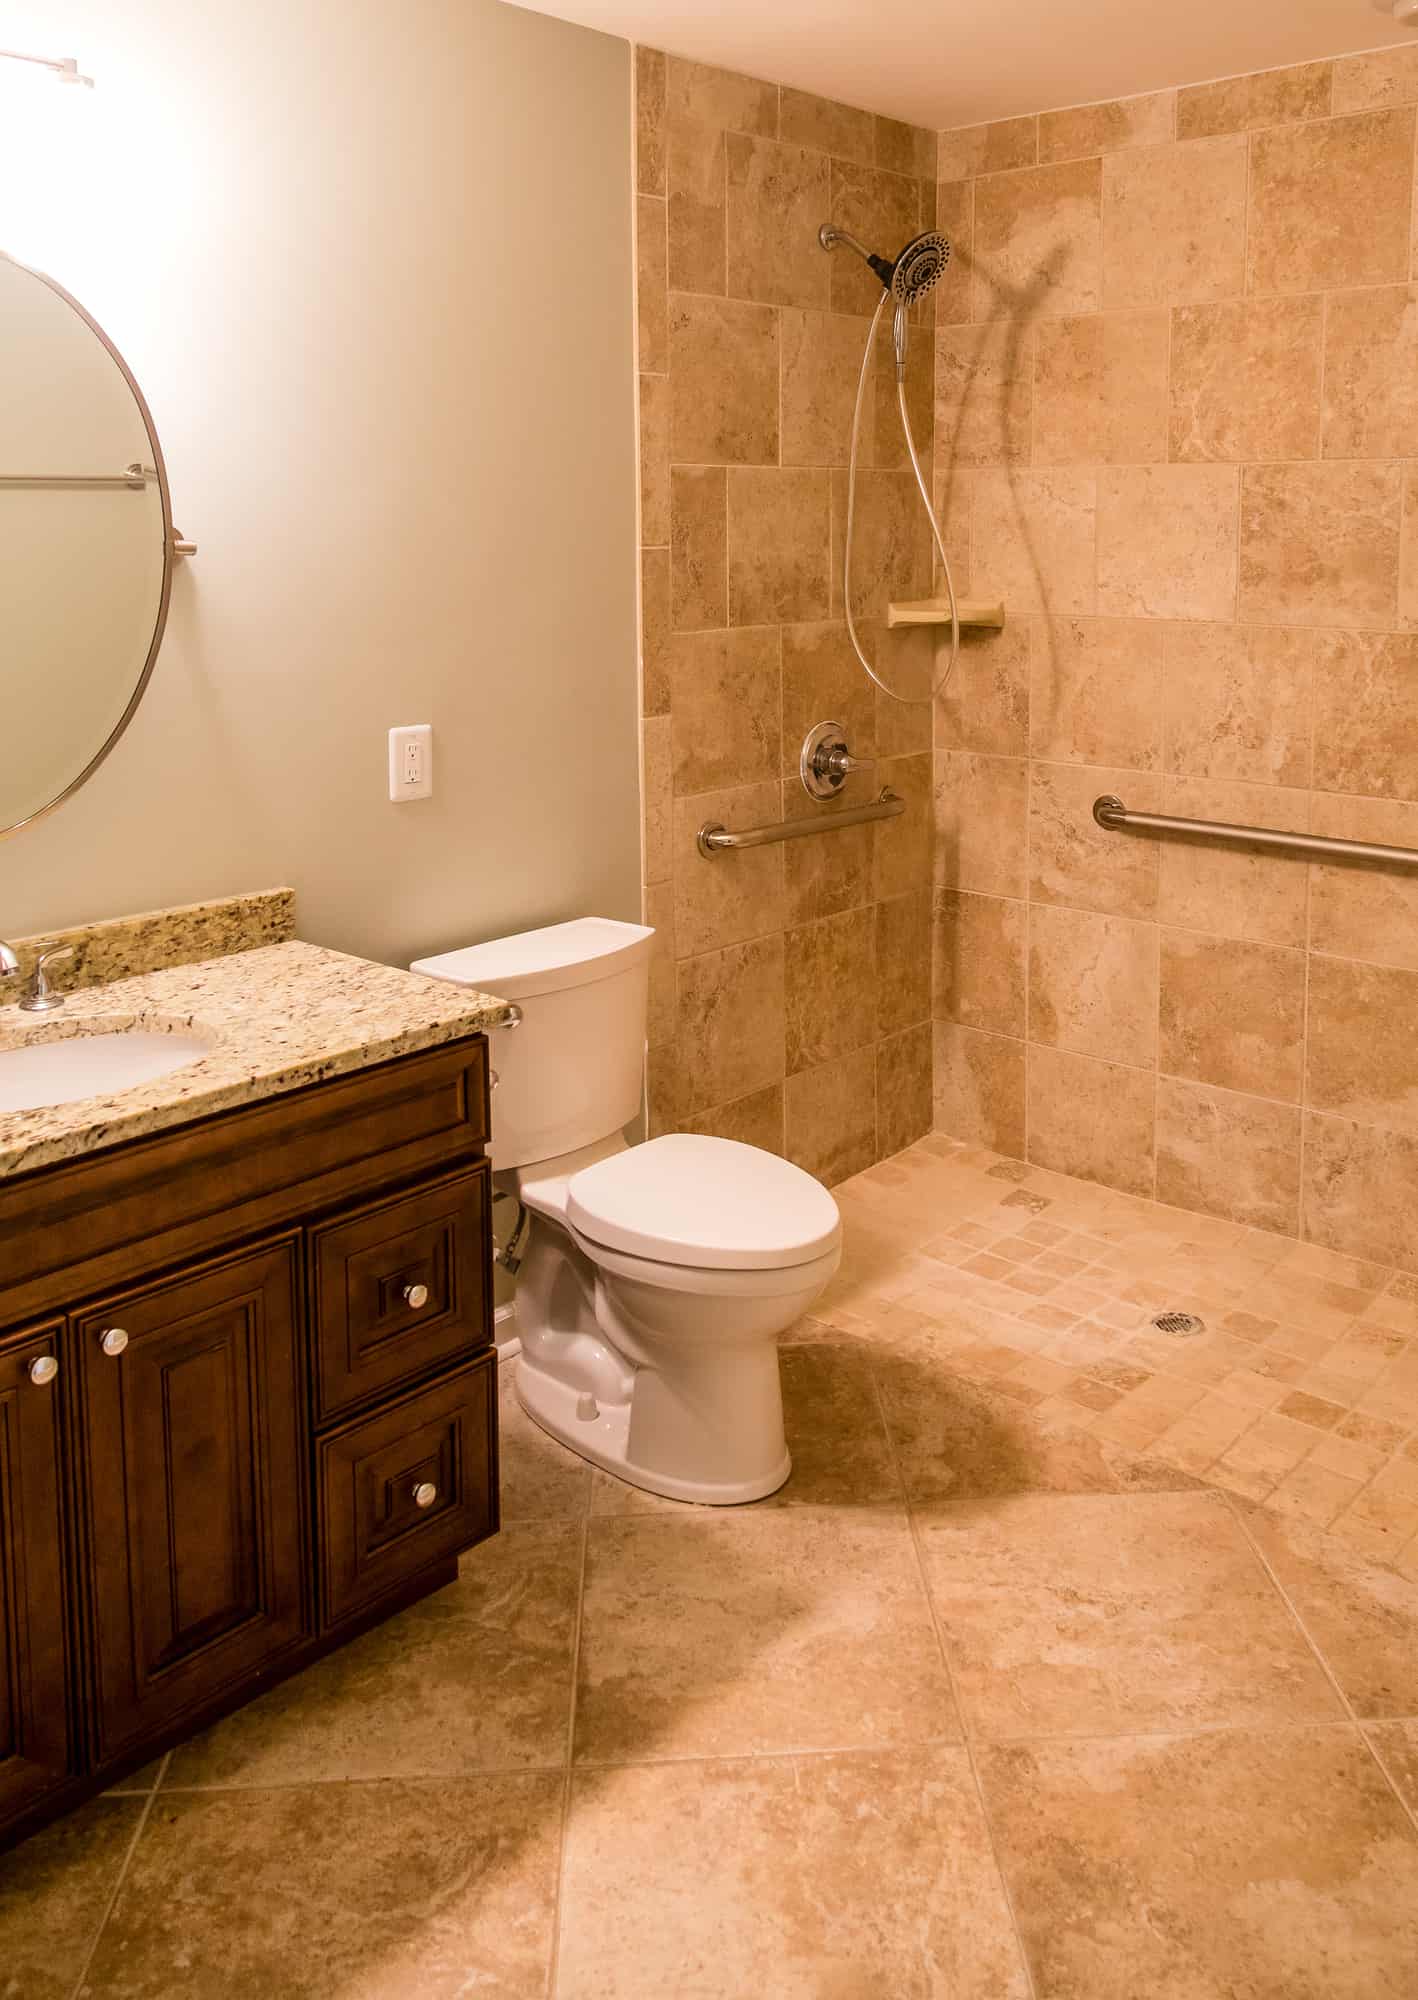 Tile Bathroom with Handicapped Shower - A modern bathroom compliant with Americans with Disability Act